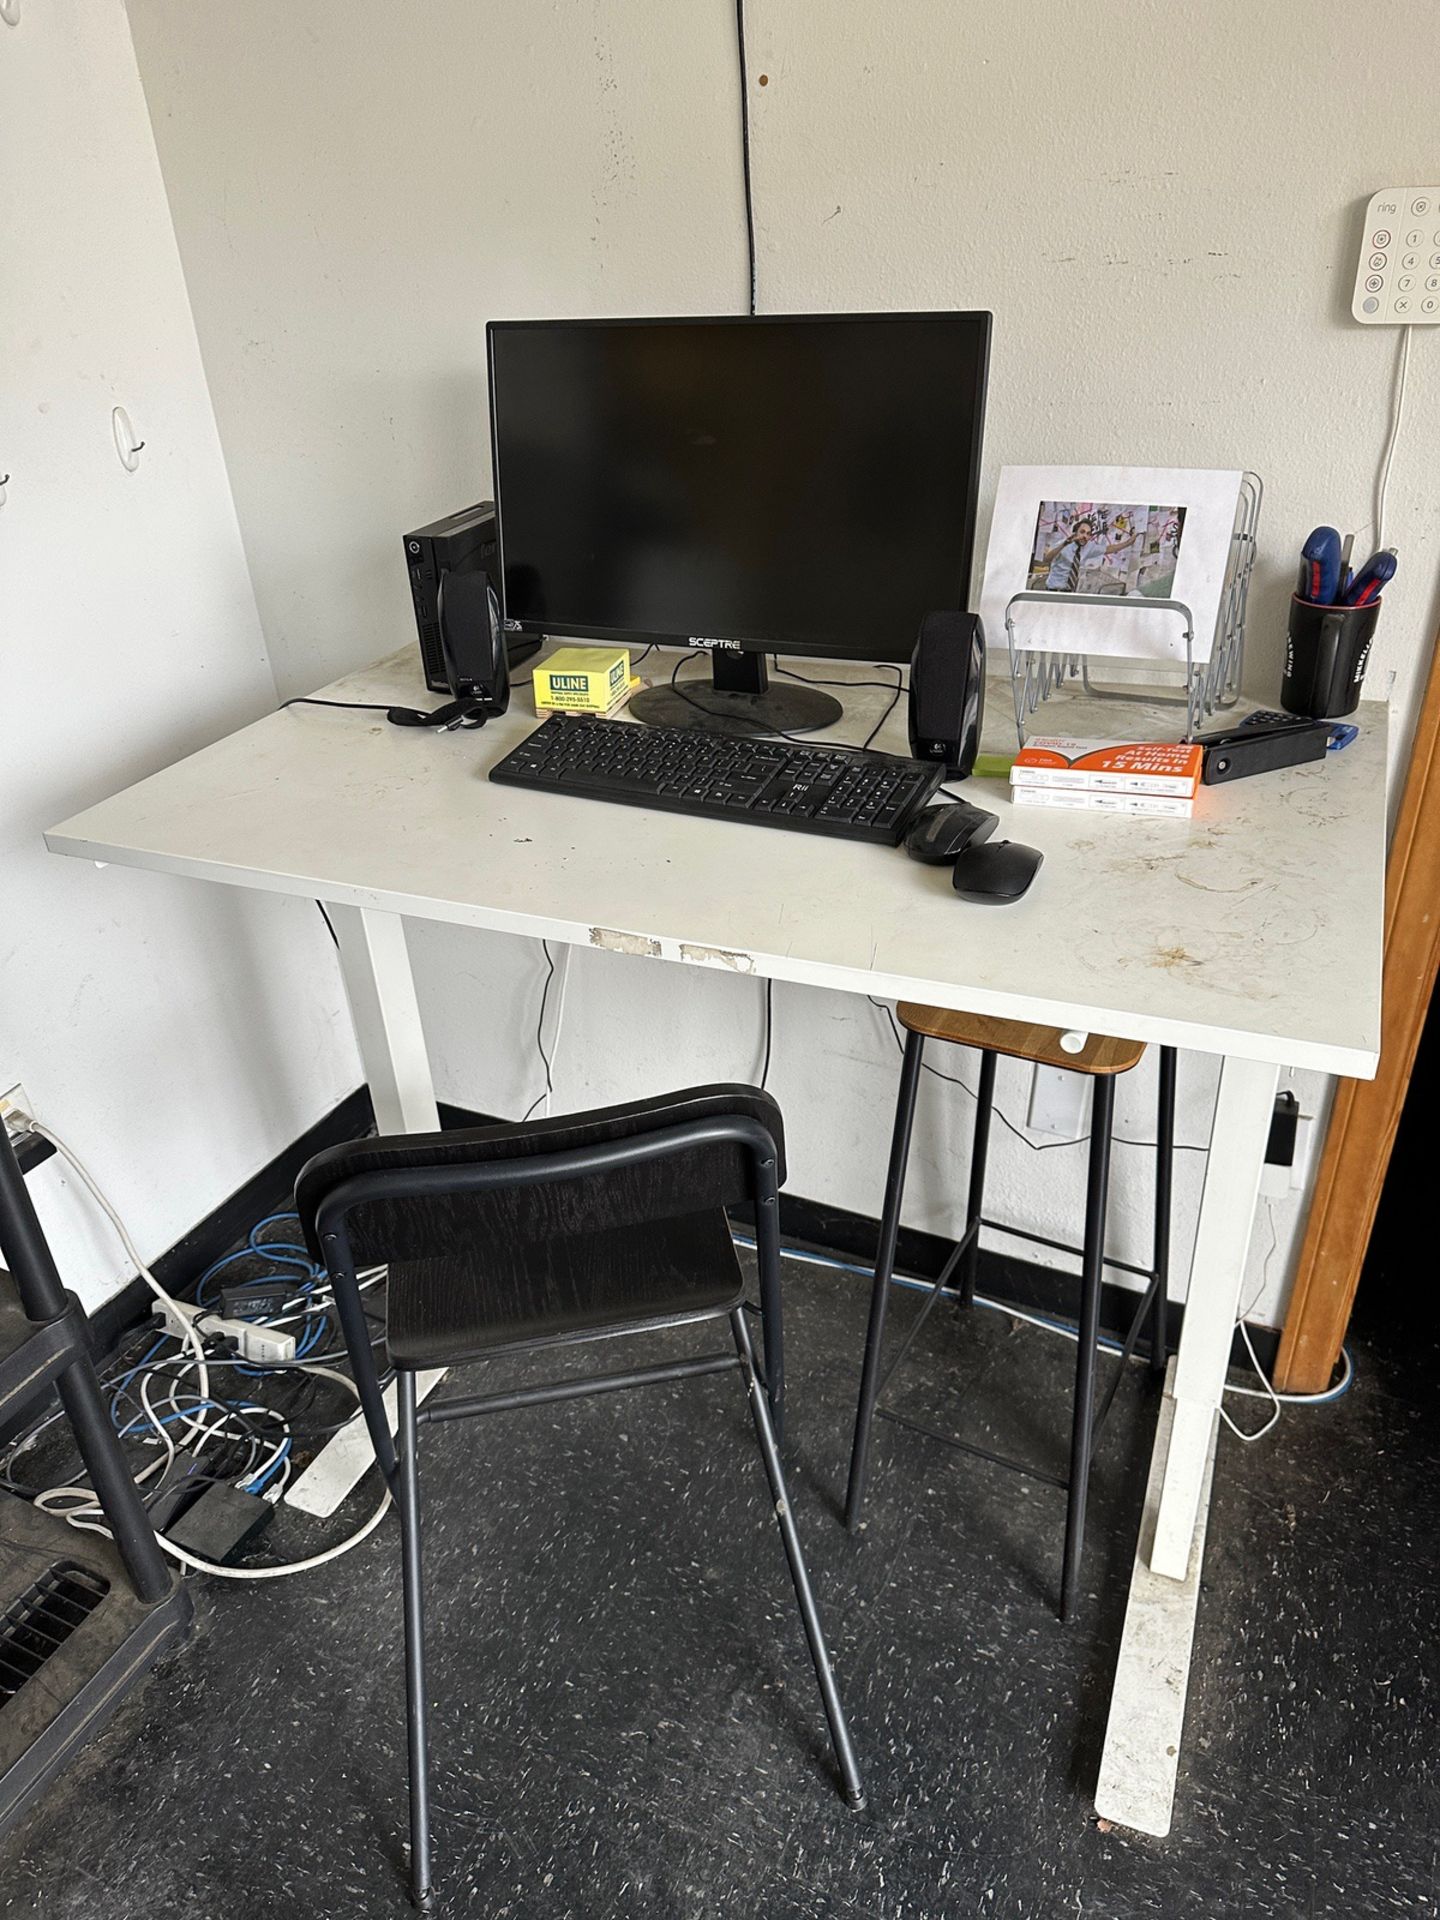 Lot of Office Area Furniture and Contents | Rig Fee $50 - Image 2 of 3